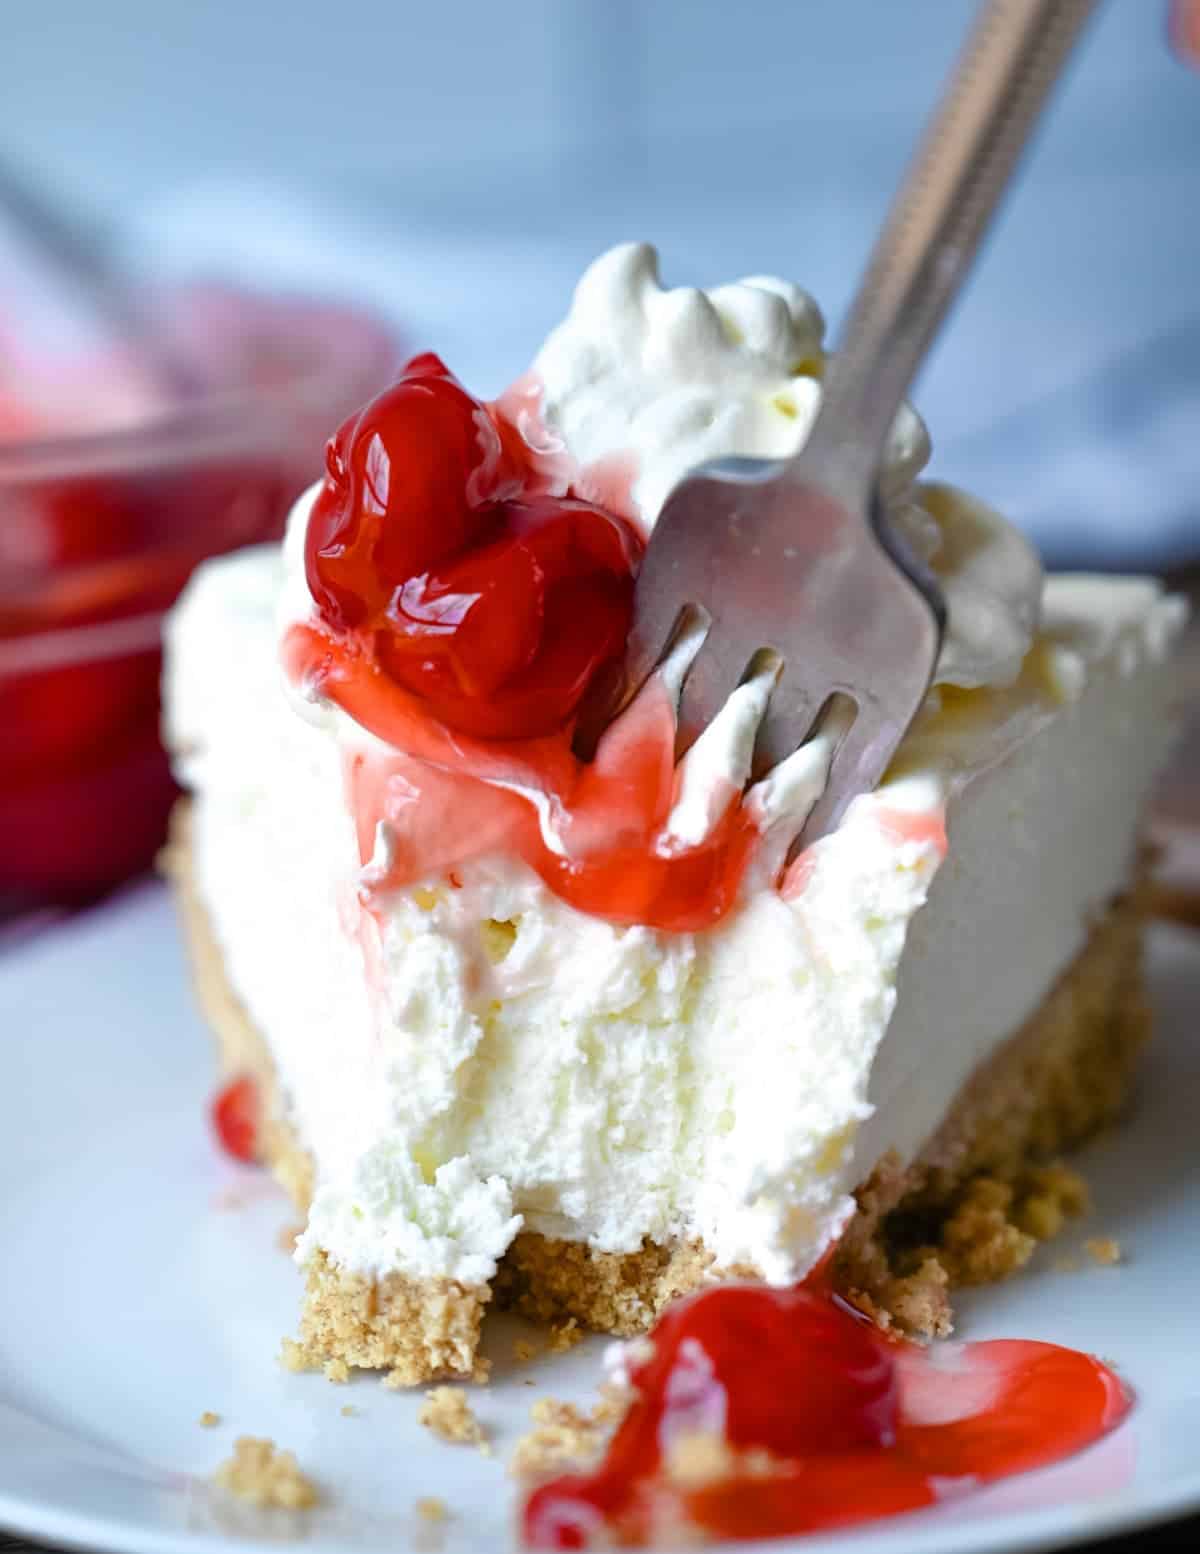 A close up photo of a fork cutting into a piece of cheesecake.